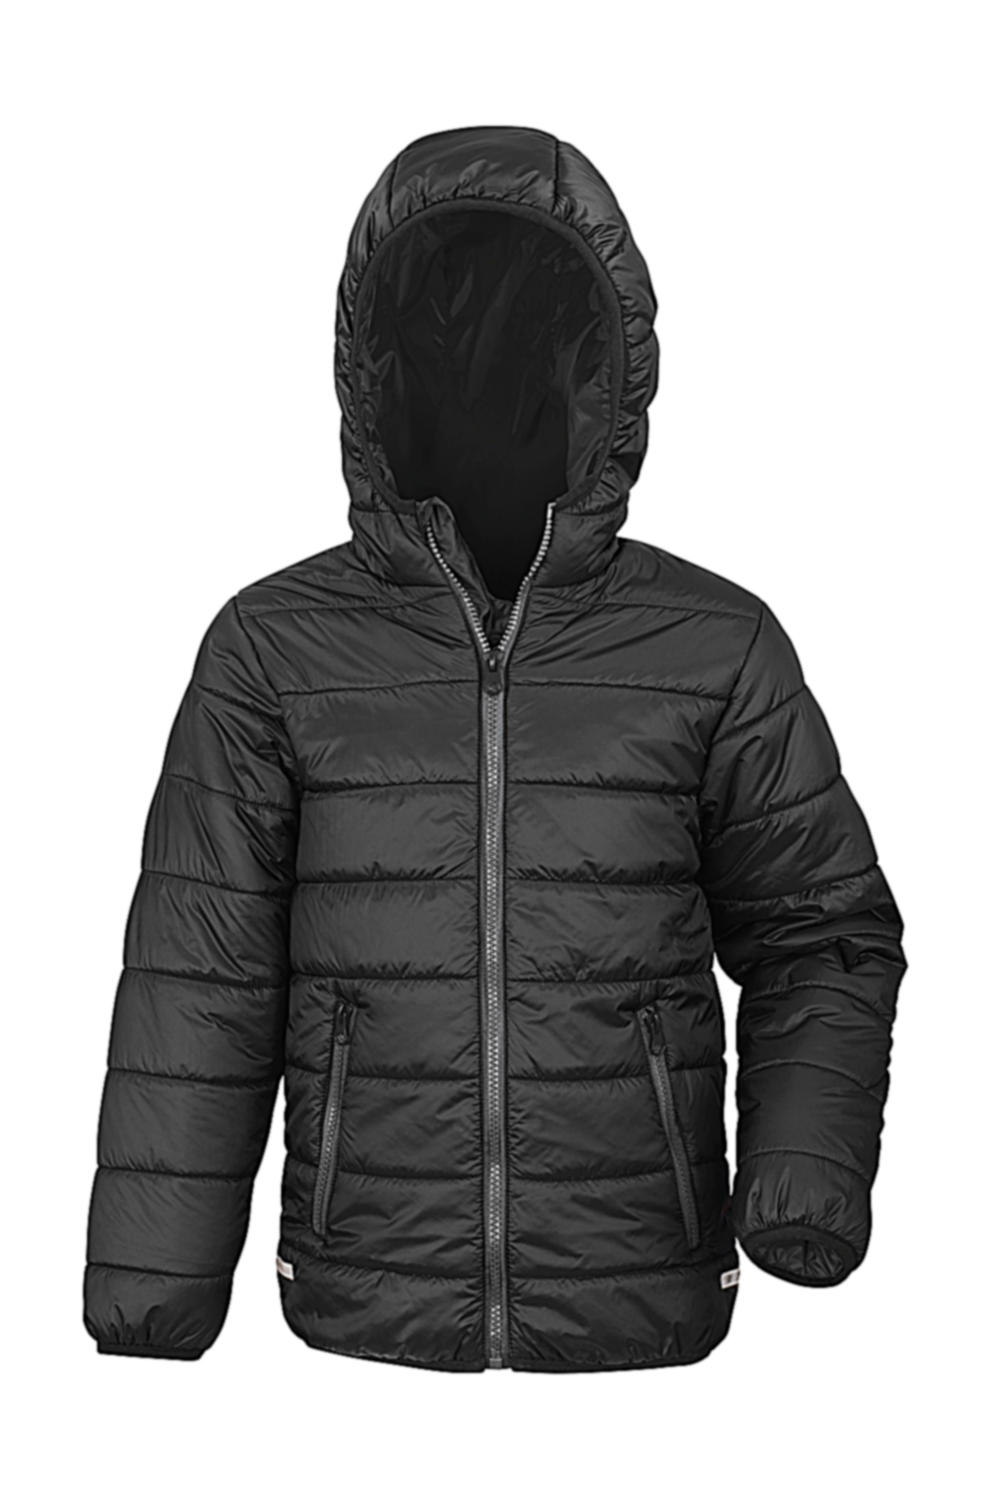  Junior/Youth Soft Padded Jacket in Farbe Black